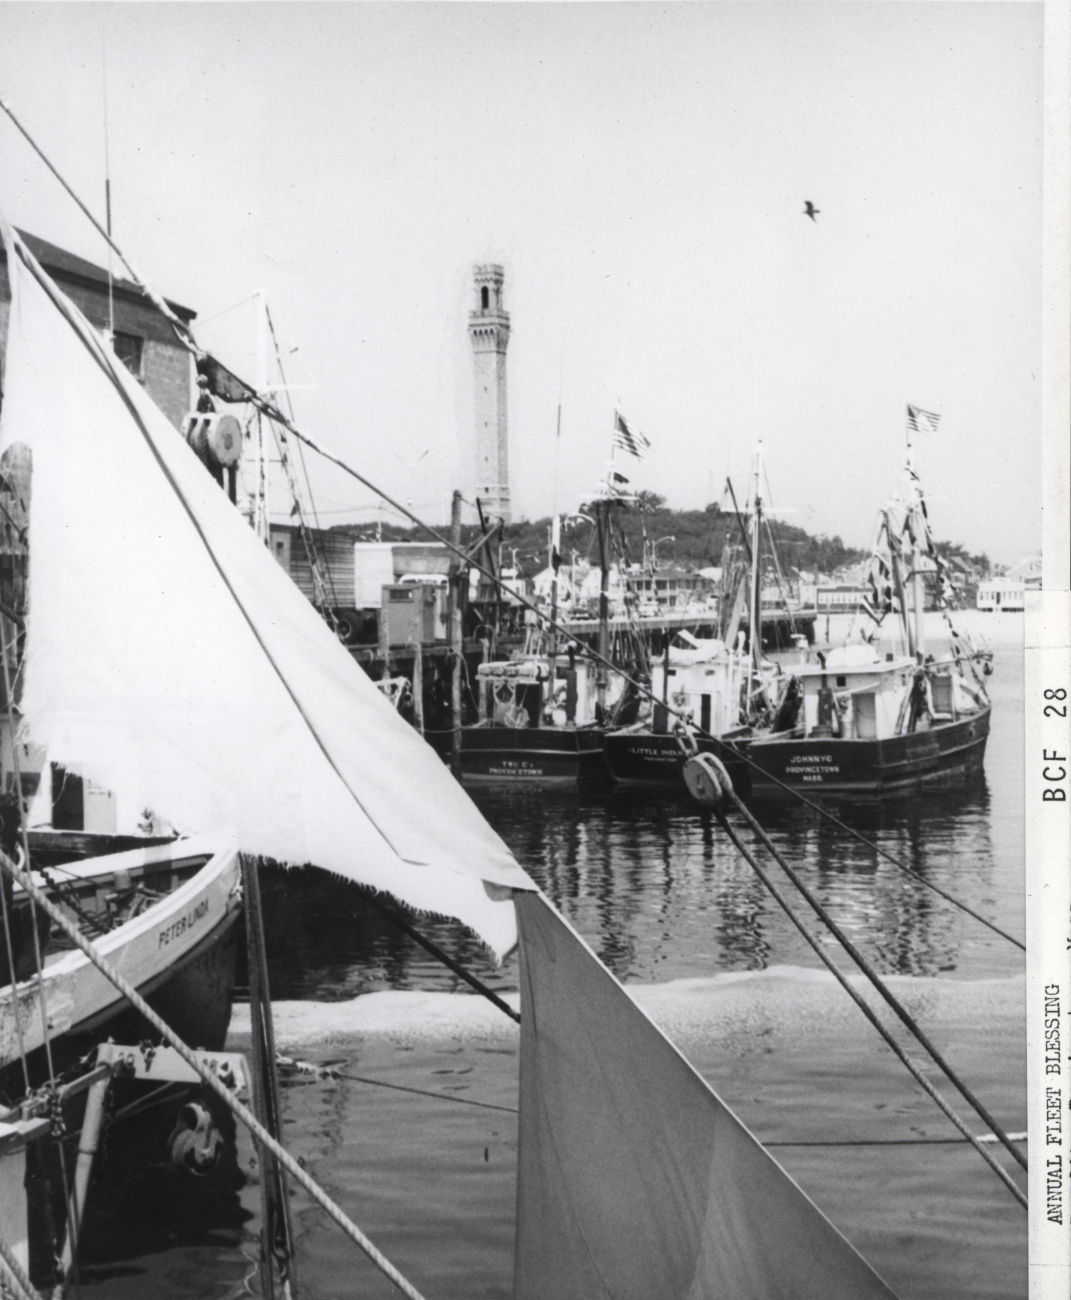 Fishing boats with Pilgrim Monument in the background